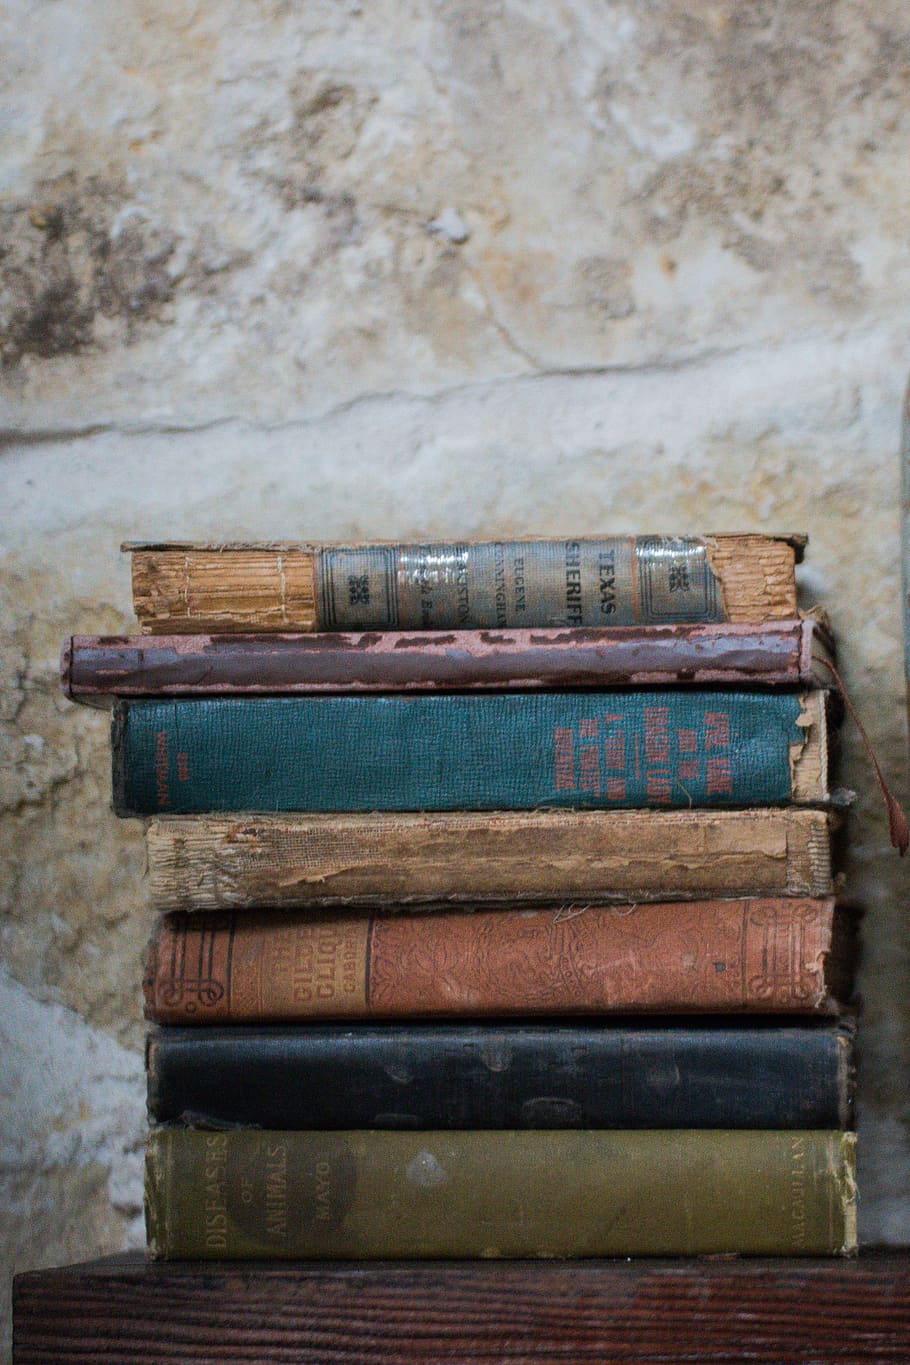 HD wallpaper: background image, old, decay, books, texture, vintage, paper  | Wallpaper Flare